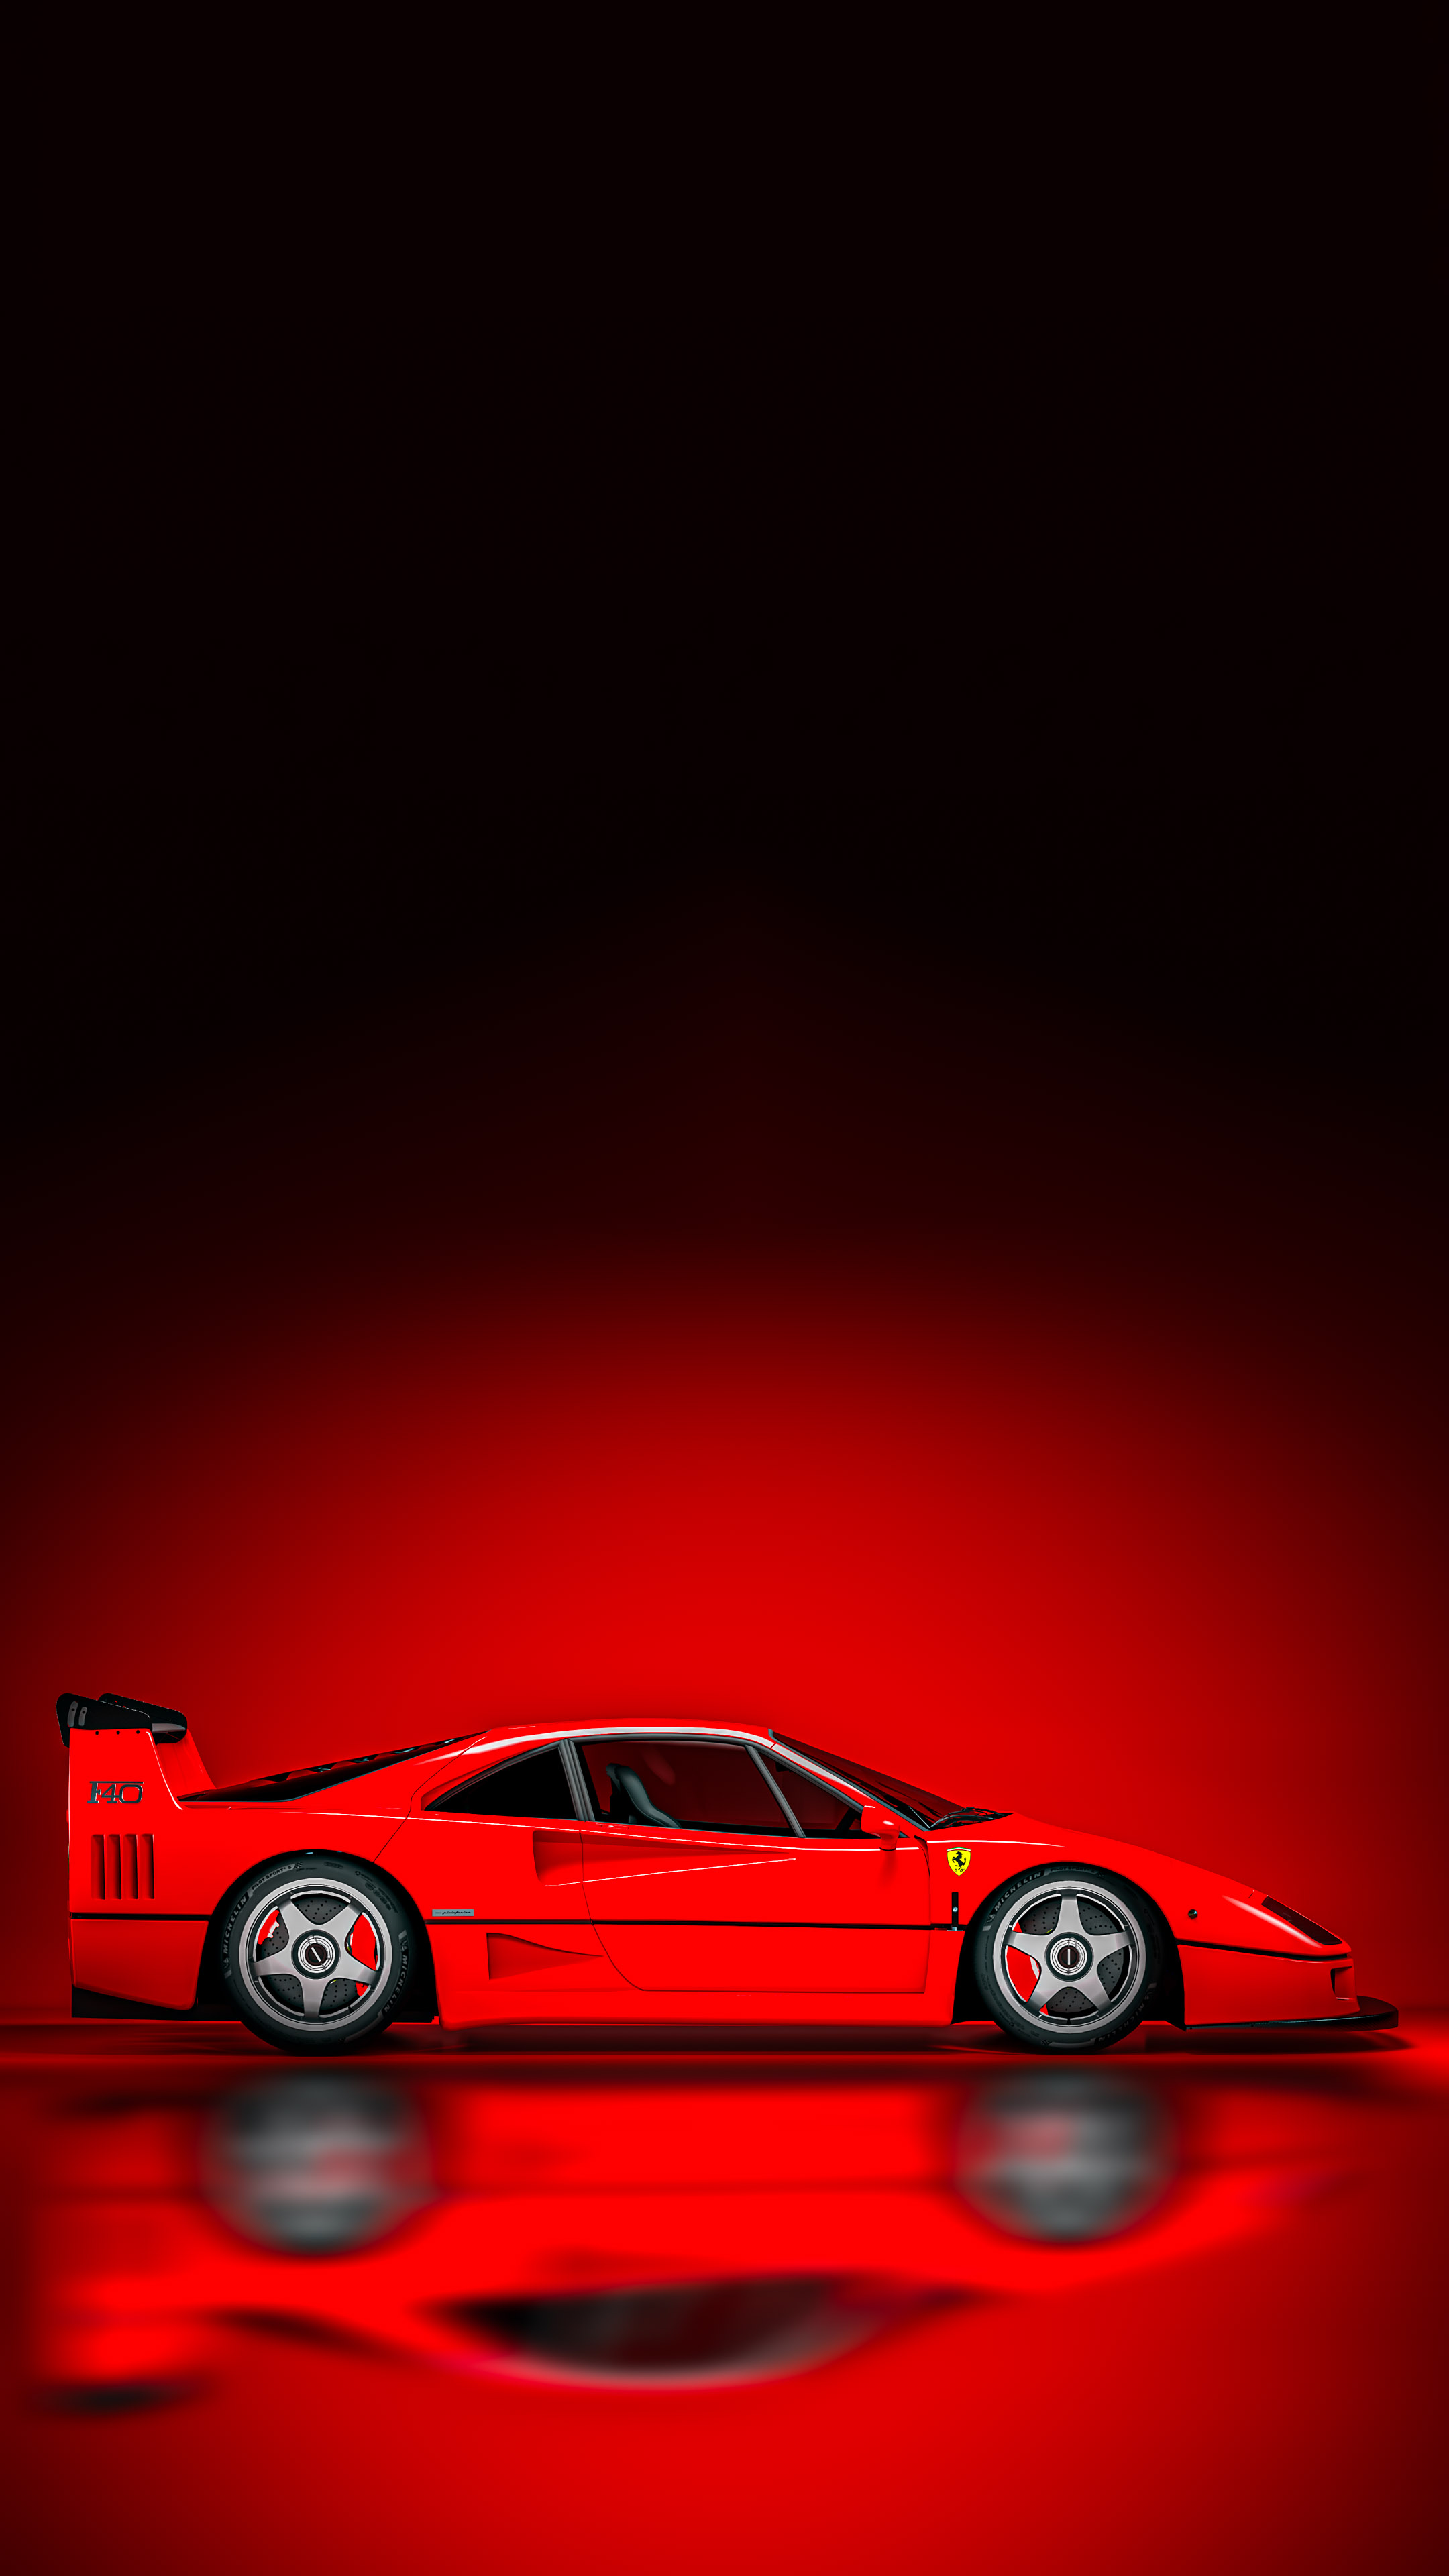 Capture the essence of the classic Ferrari F40  with our car wallpaper for iOS, designed to showcase its timeless beauty.